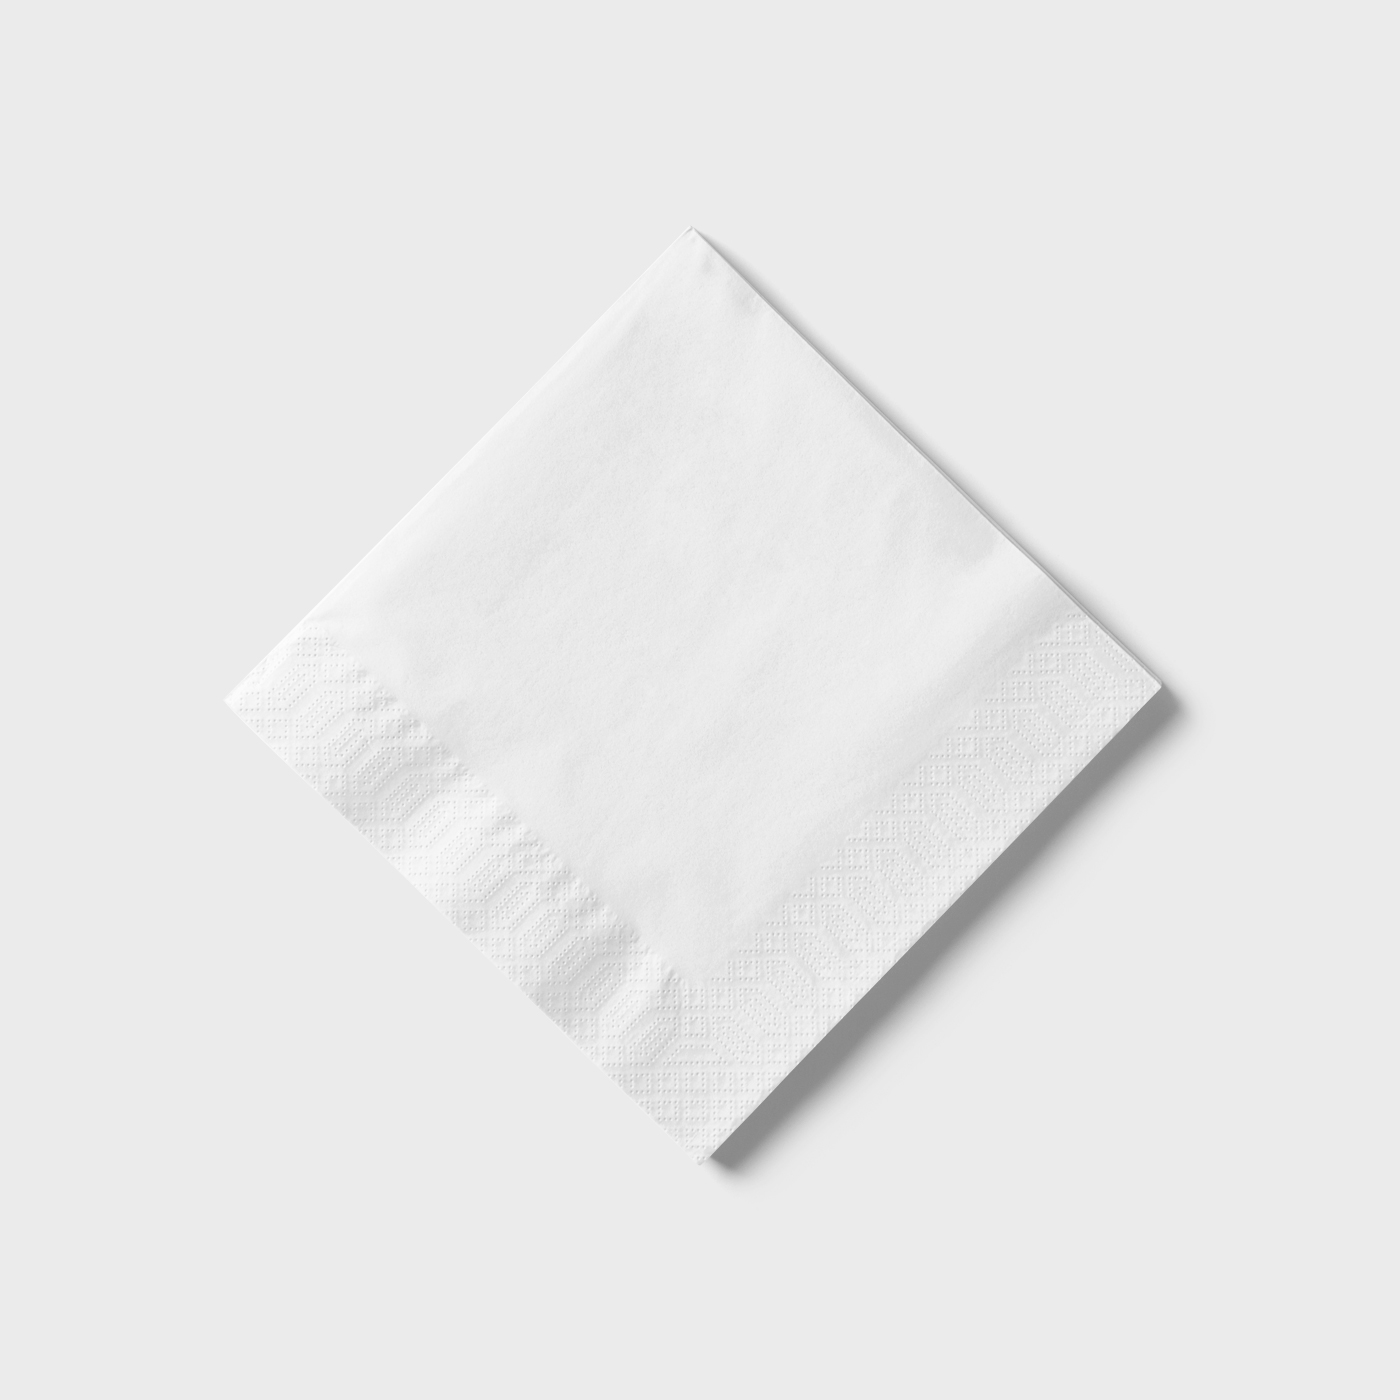 Top View of a Folded Paper Napkin Mockup FREE PSD